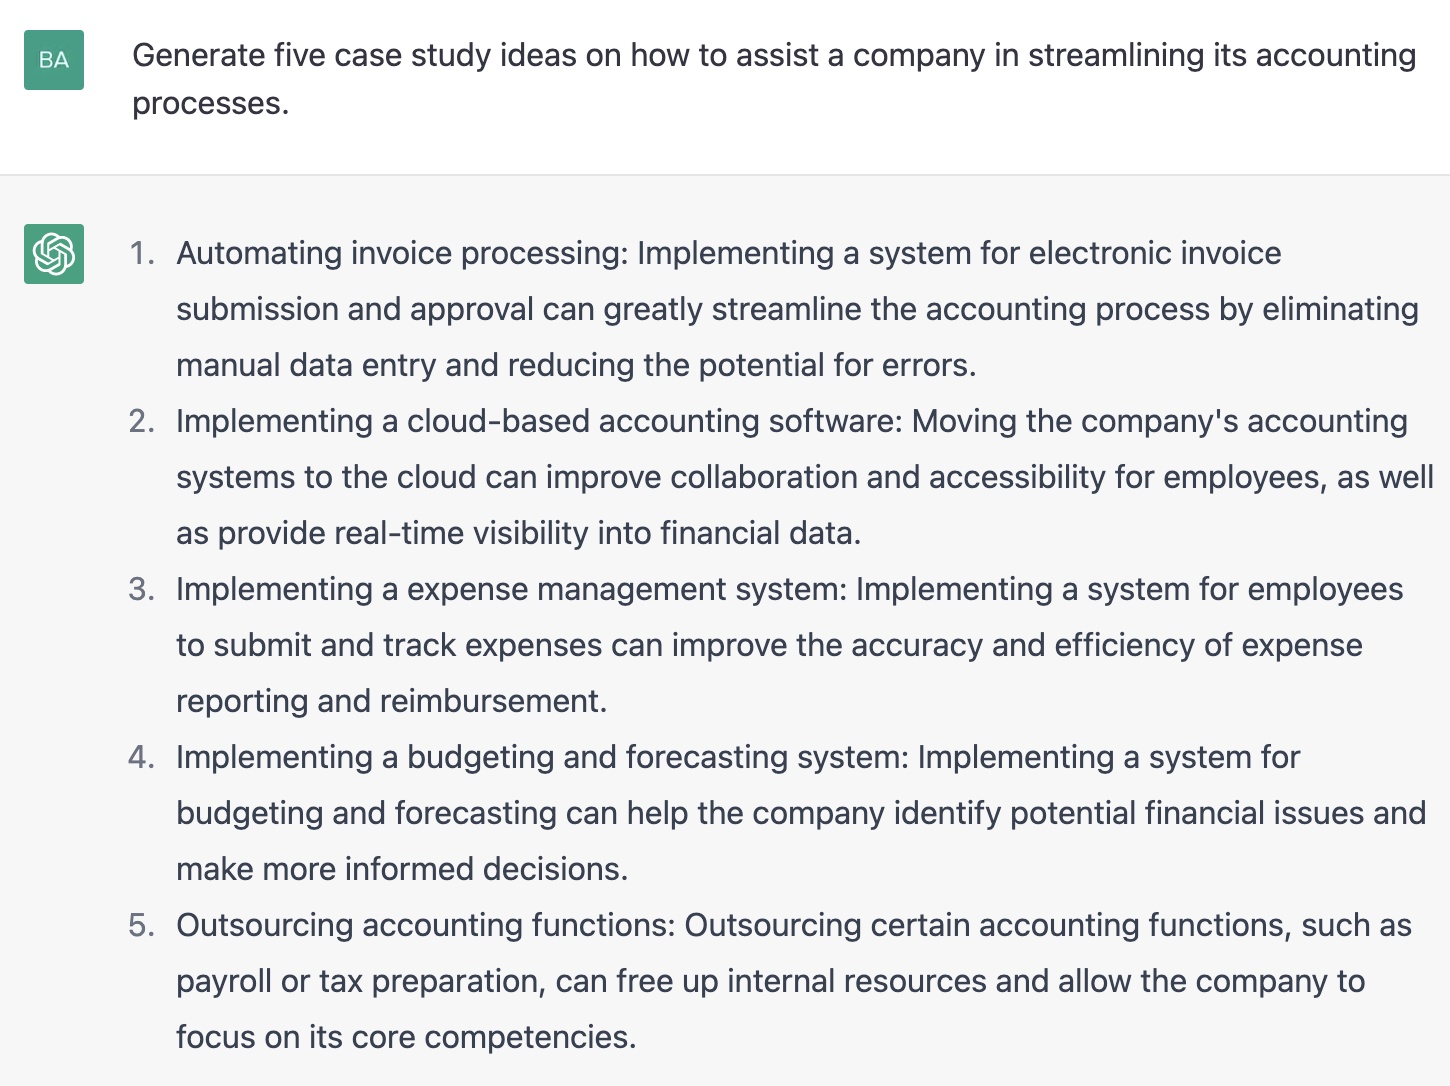 ChatGPT prompt about generating five case study ideas on how to assist a company in streamlining its accounting processes